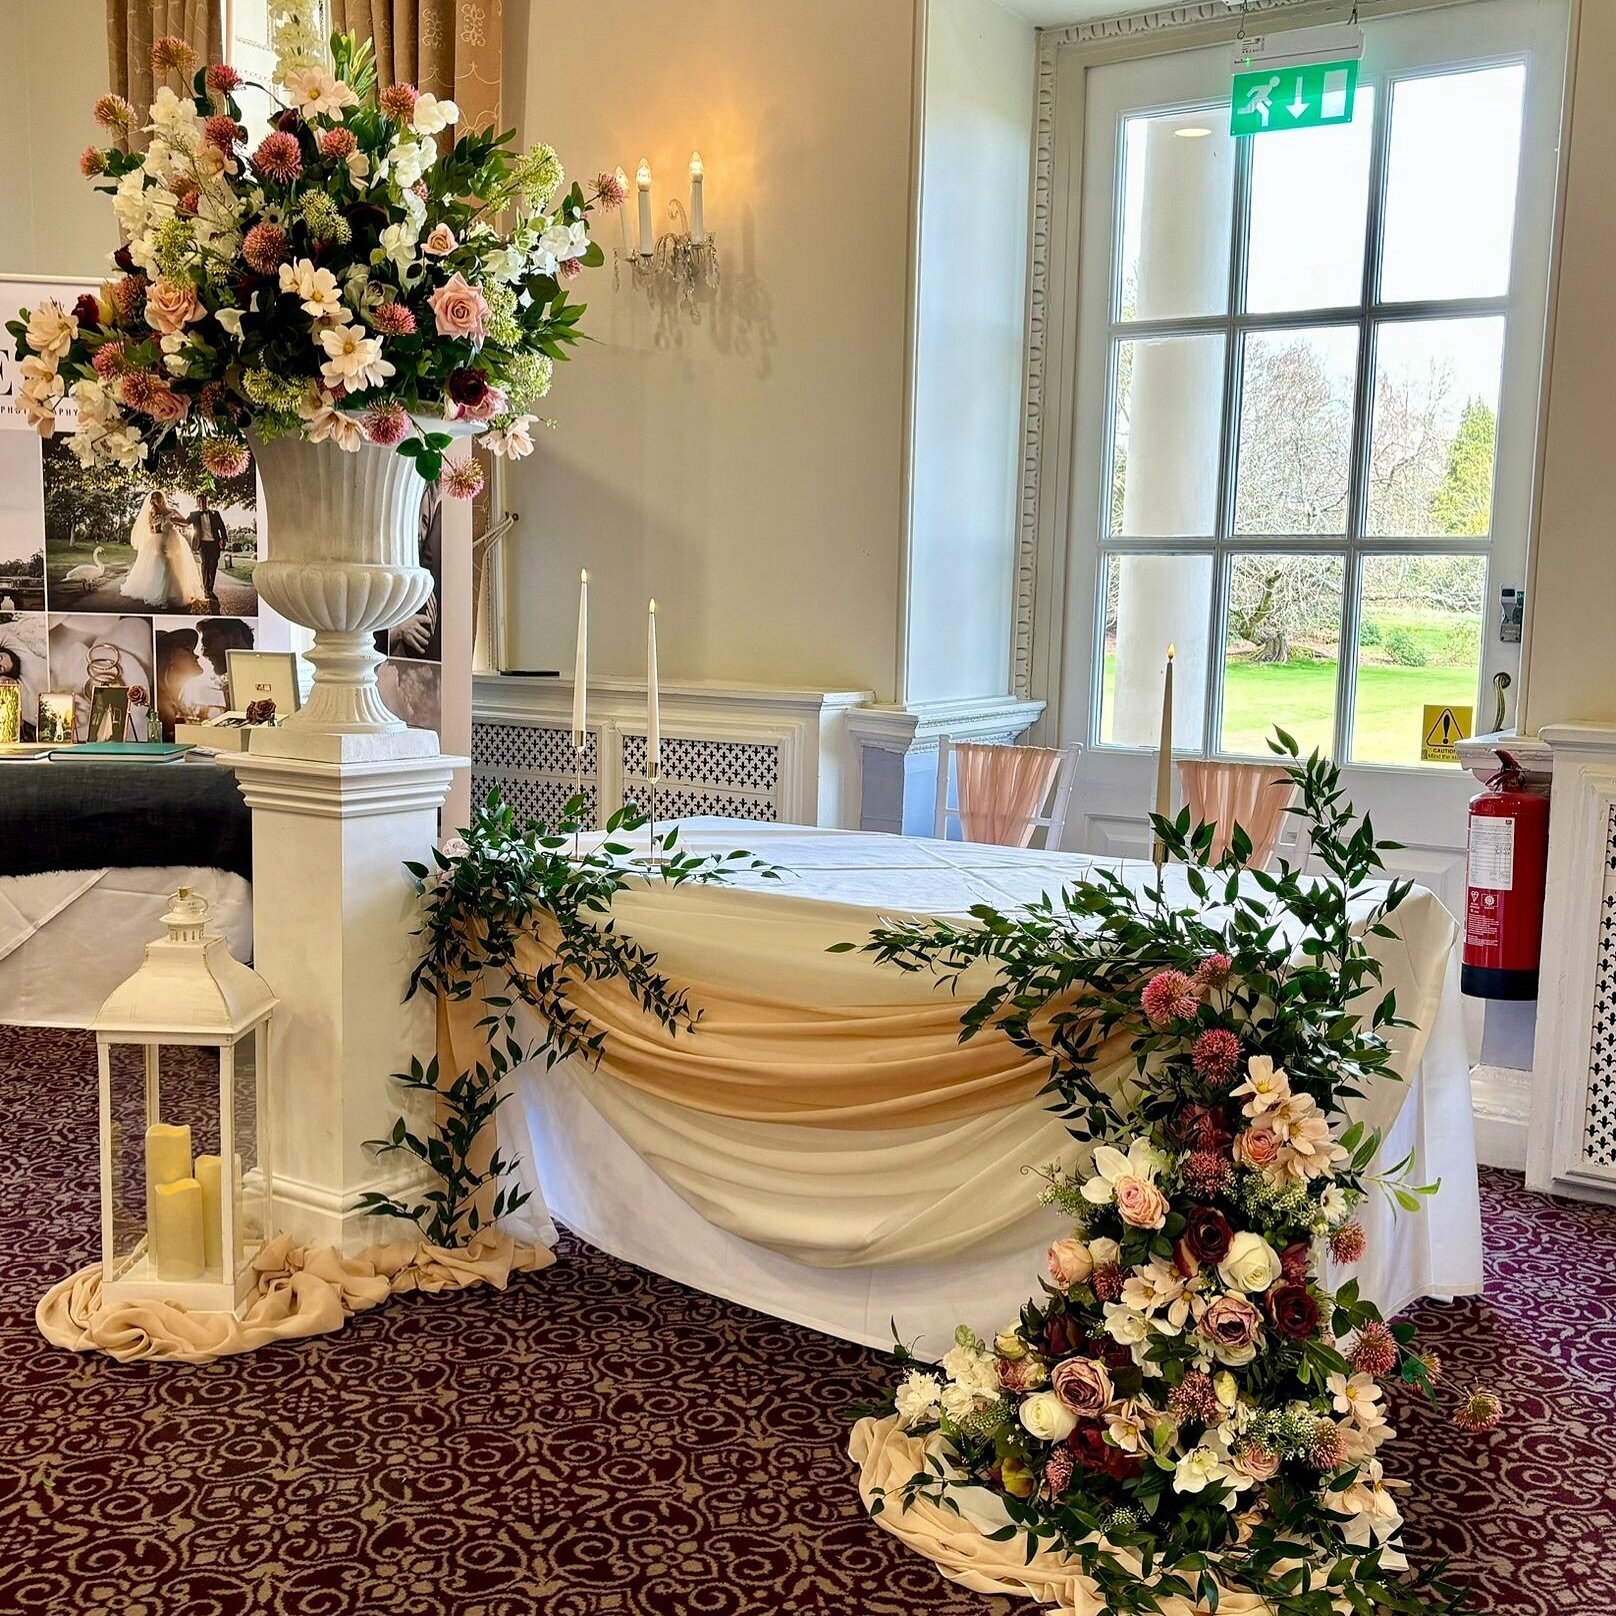 Gorgeous ceremony table @buxtedparkhotel with faux florals and fresh ruscus styled by our team 🌿🌹

Have you thought how&rsquo;d you style your ceremony table? Get in touch and see how we can help 💕

.
.
.
.
.
.
.
#weddingceremonydecor #weddingidea